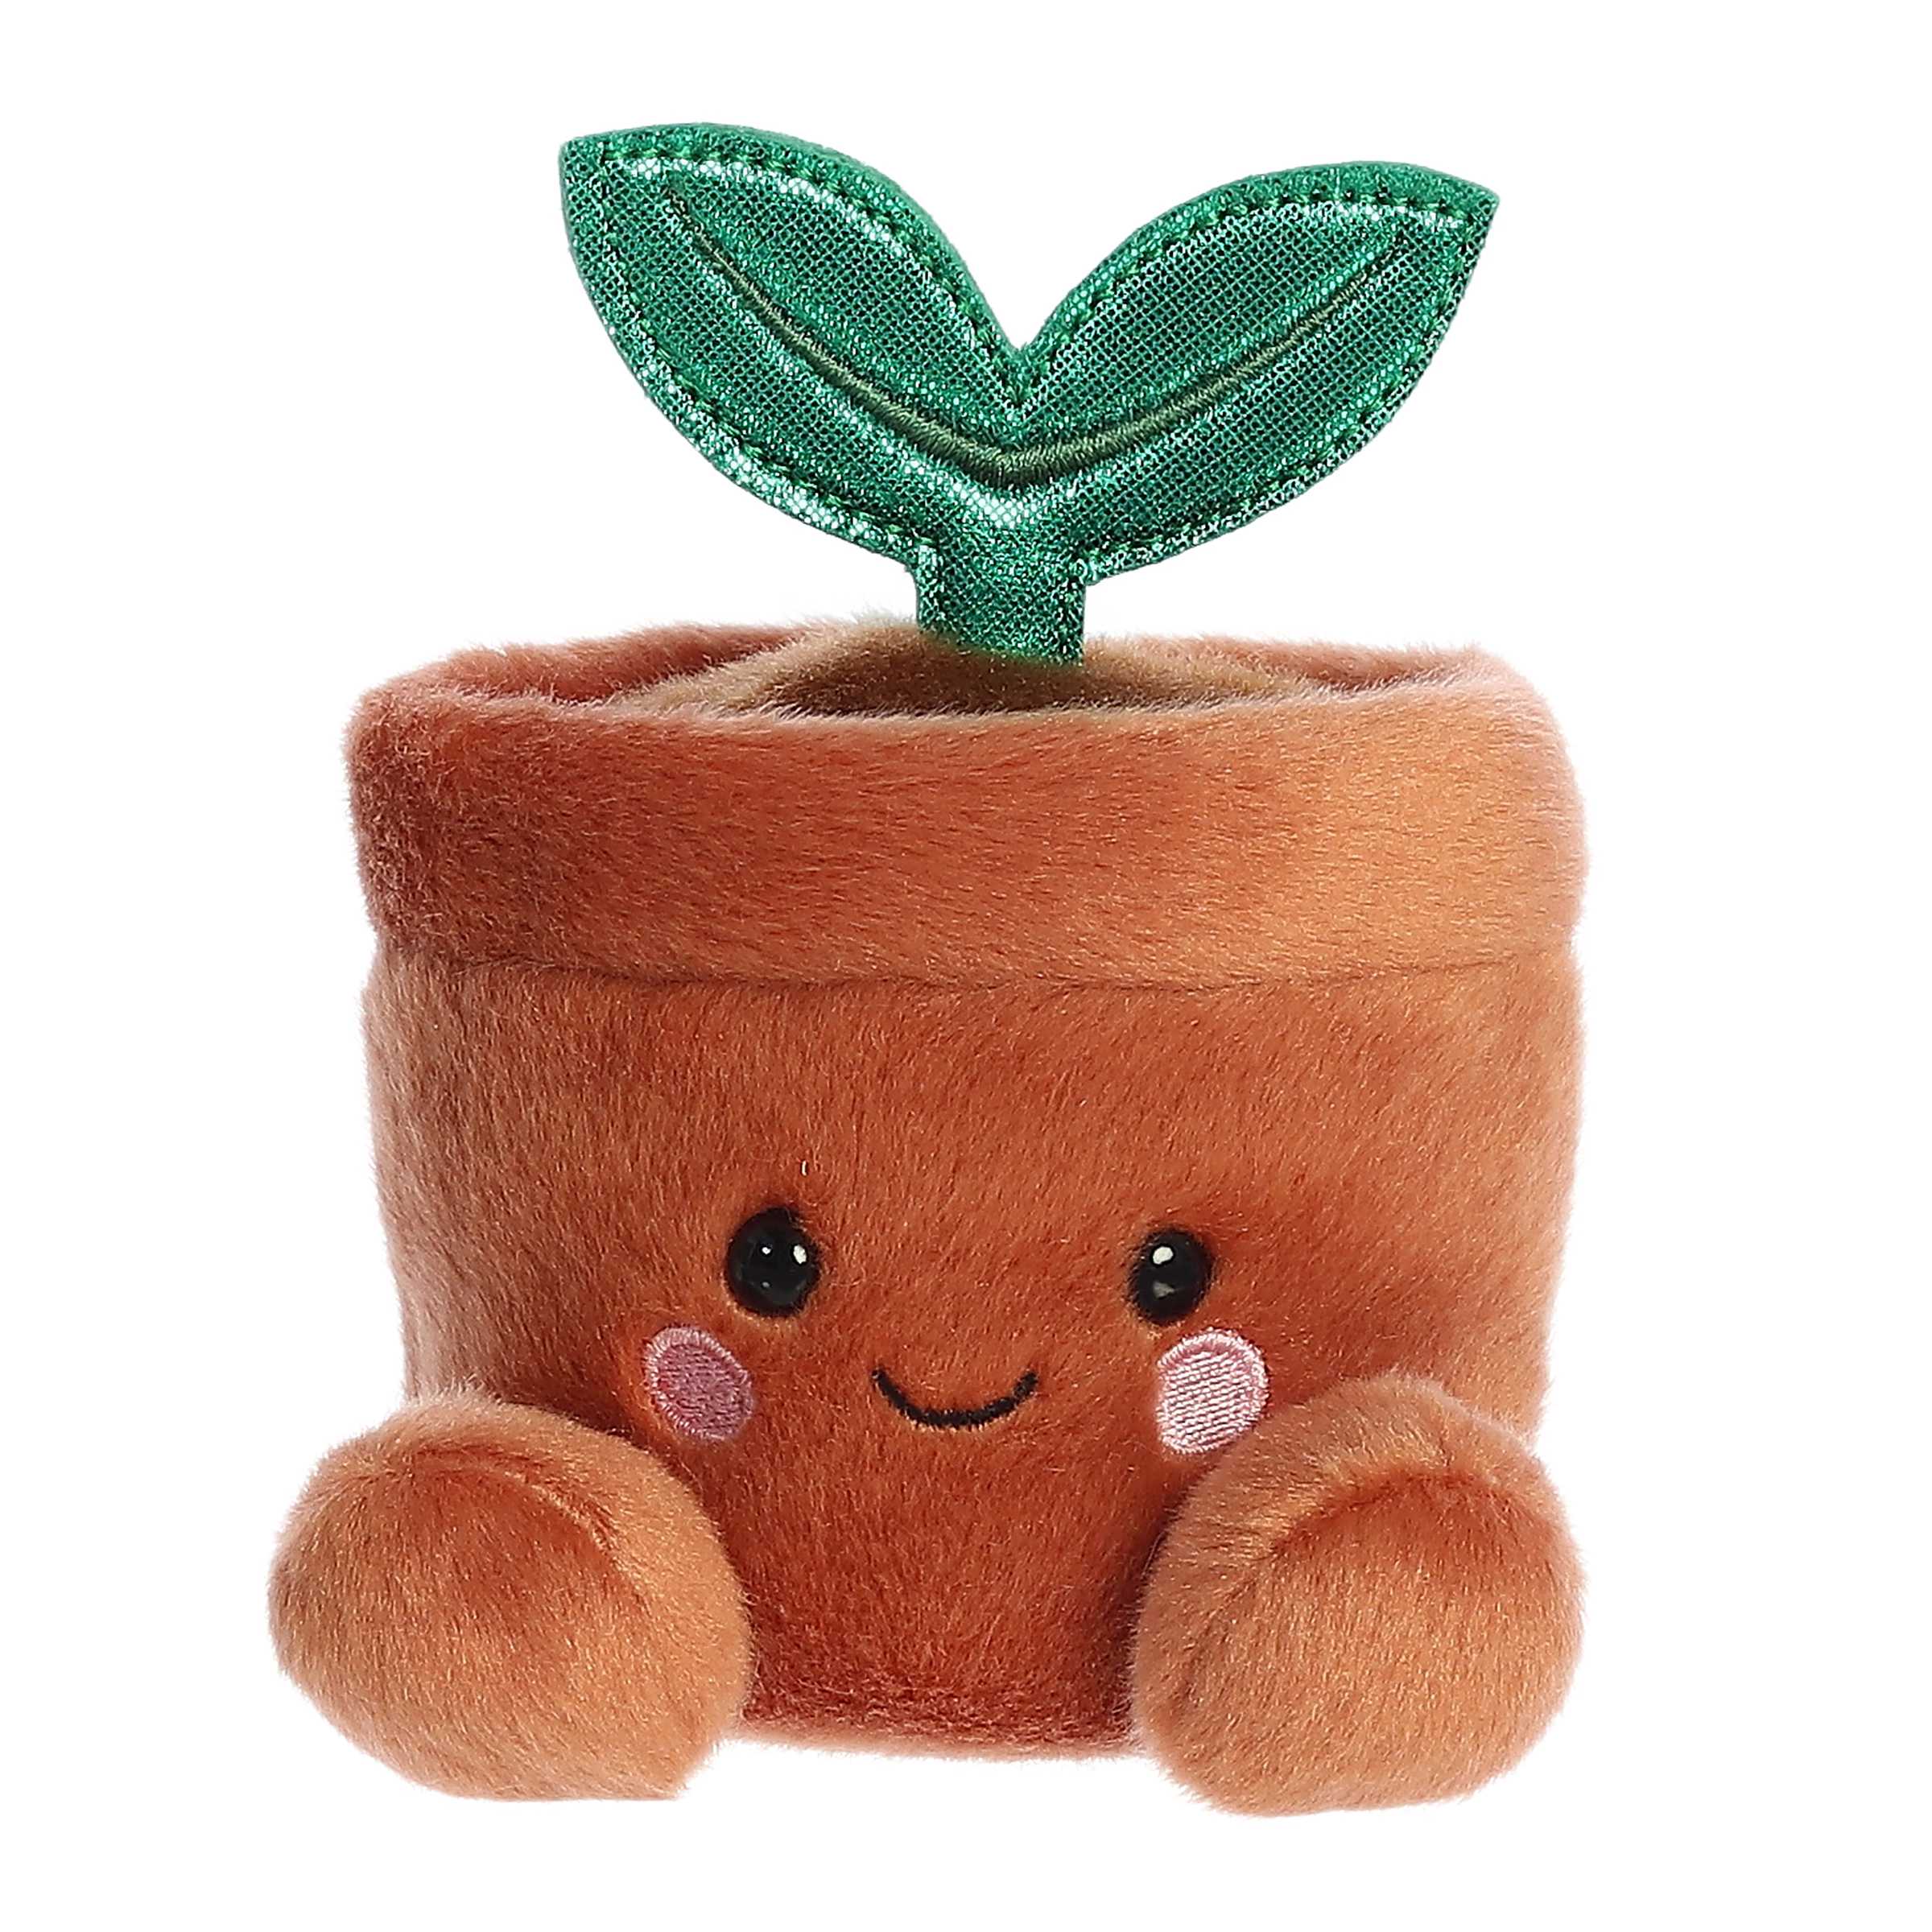 Tiny plant shaped plush toy with brown fur body filled with bean pellets, embroidered smiling face and a green leaf design